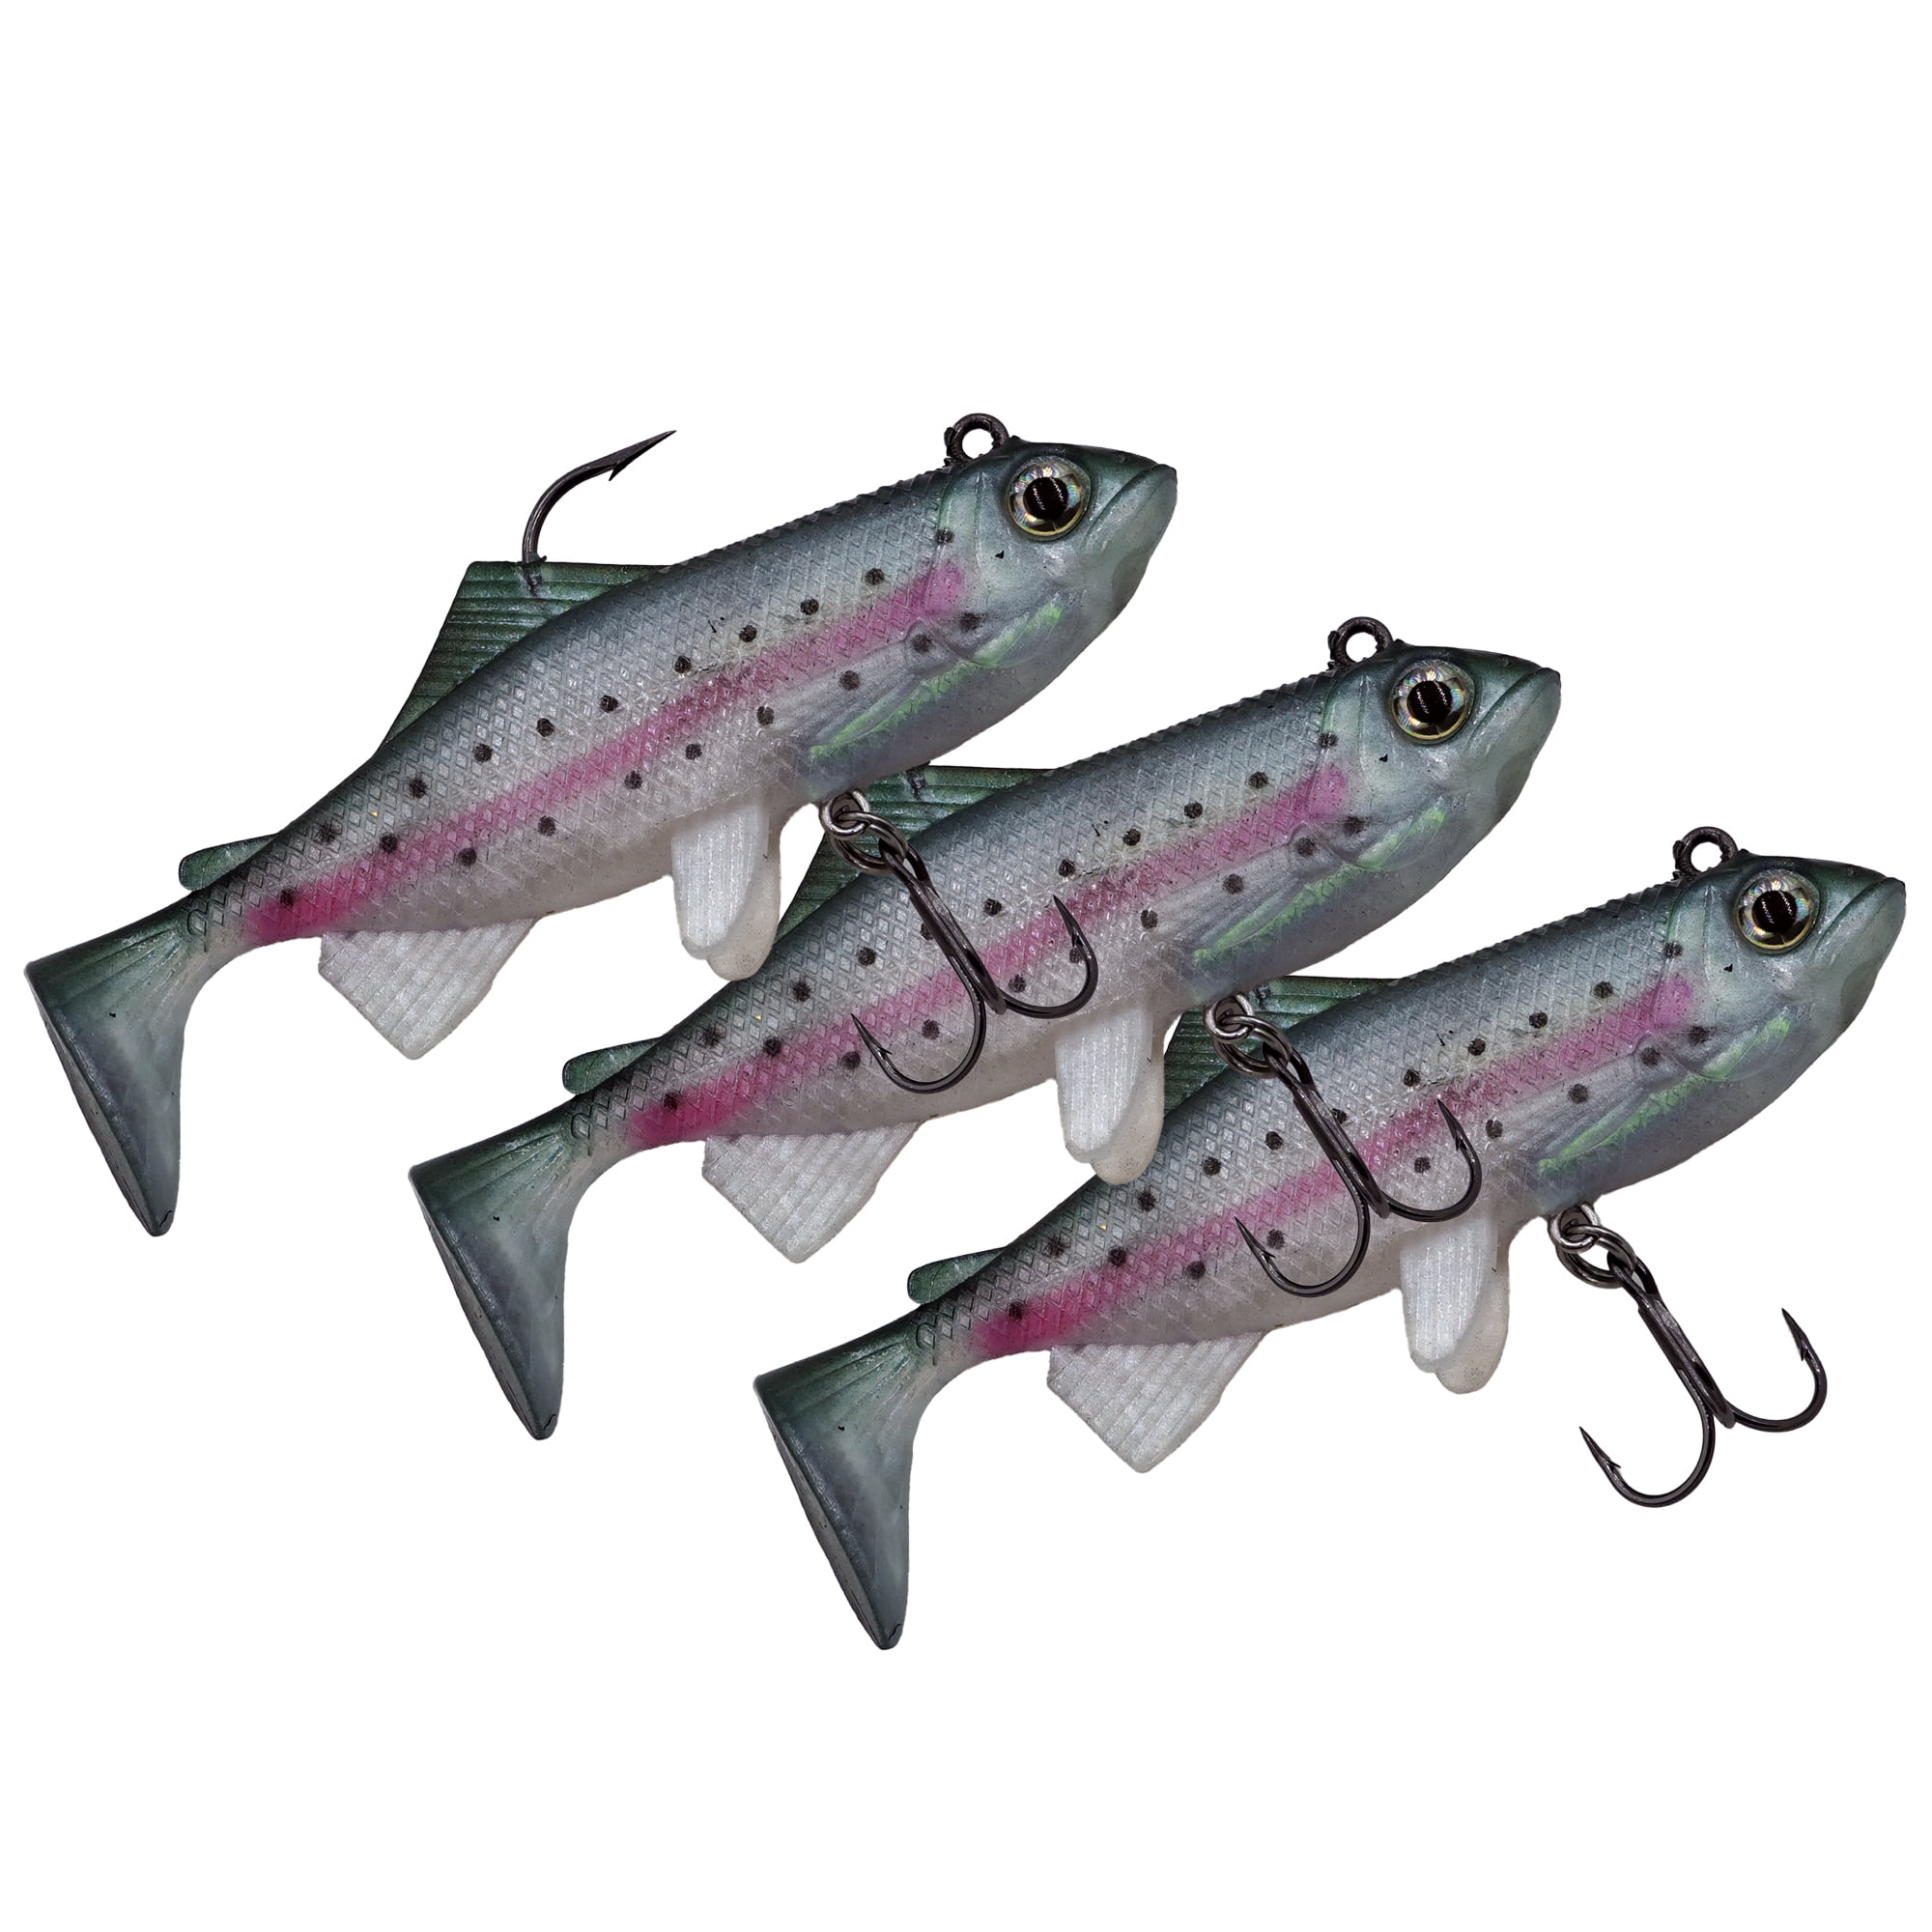 Storm WildEye Live Rainbow Trout Fishing Lures (3-Pack) - 5/16 oz